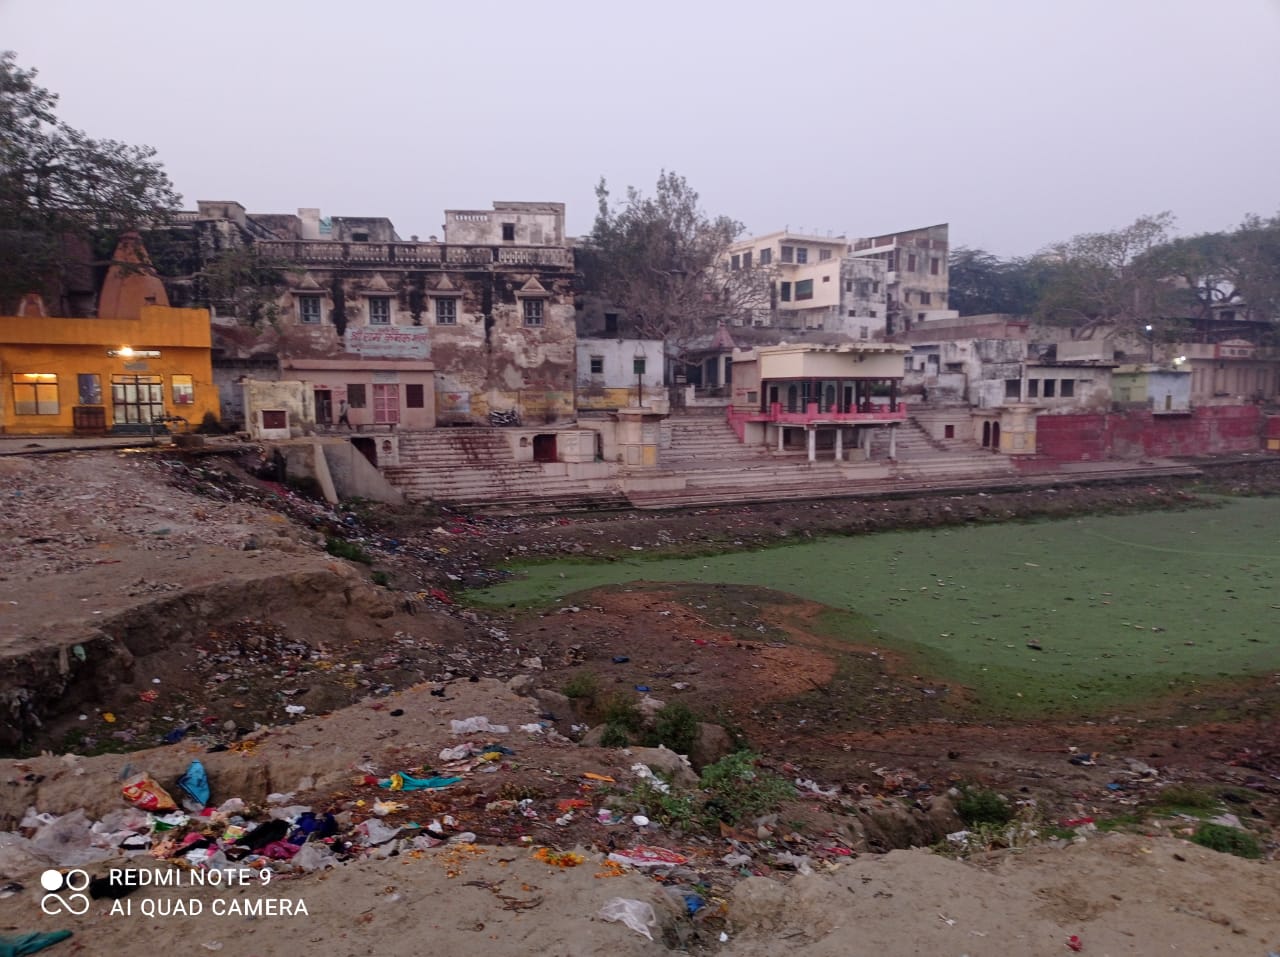 Yamuna Mission warned of legal action against encroachment